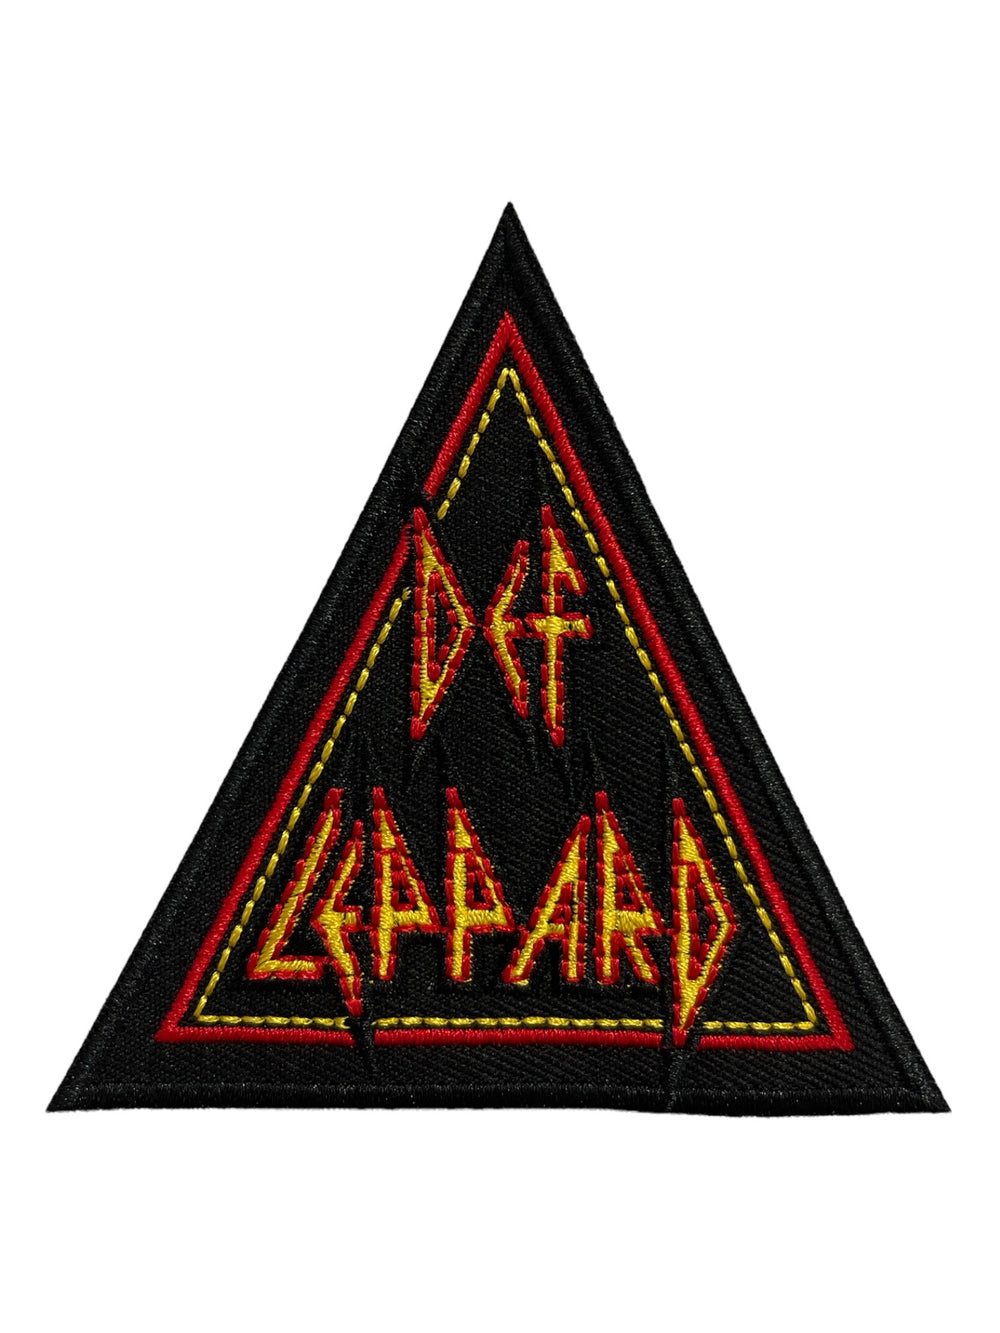 Def Leppard Triangle Official Woven Patch Brand New